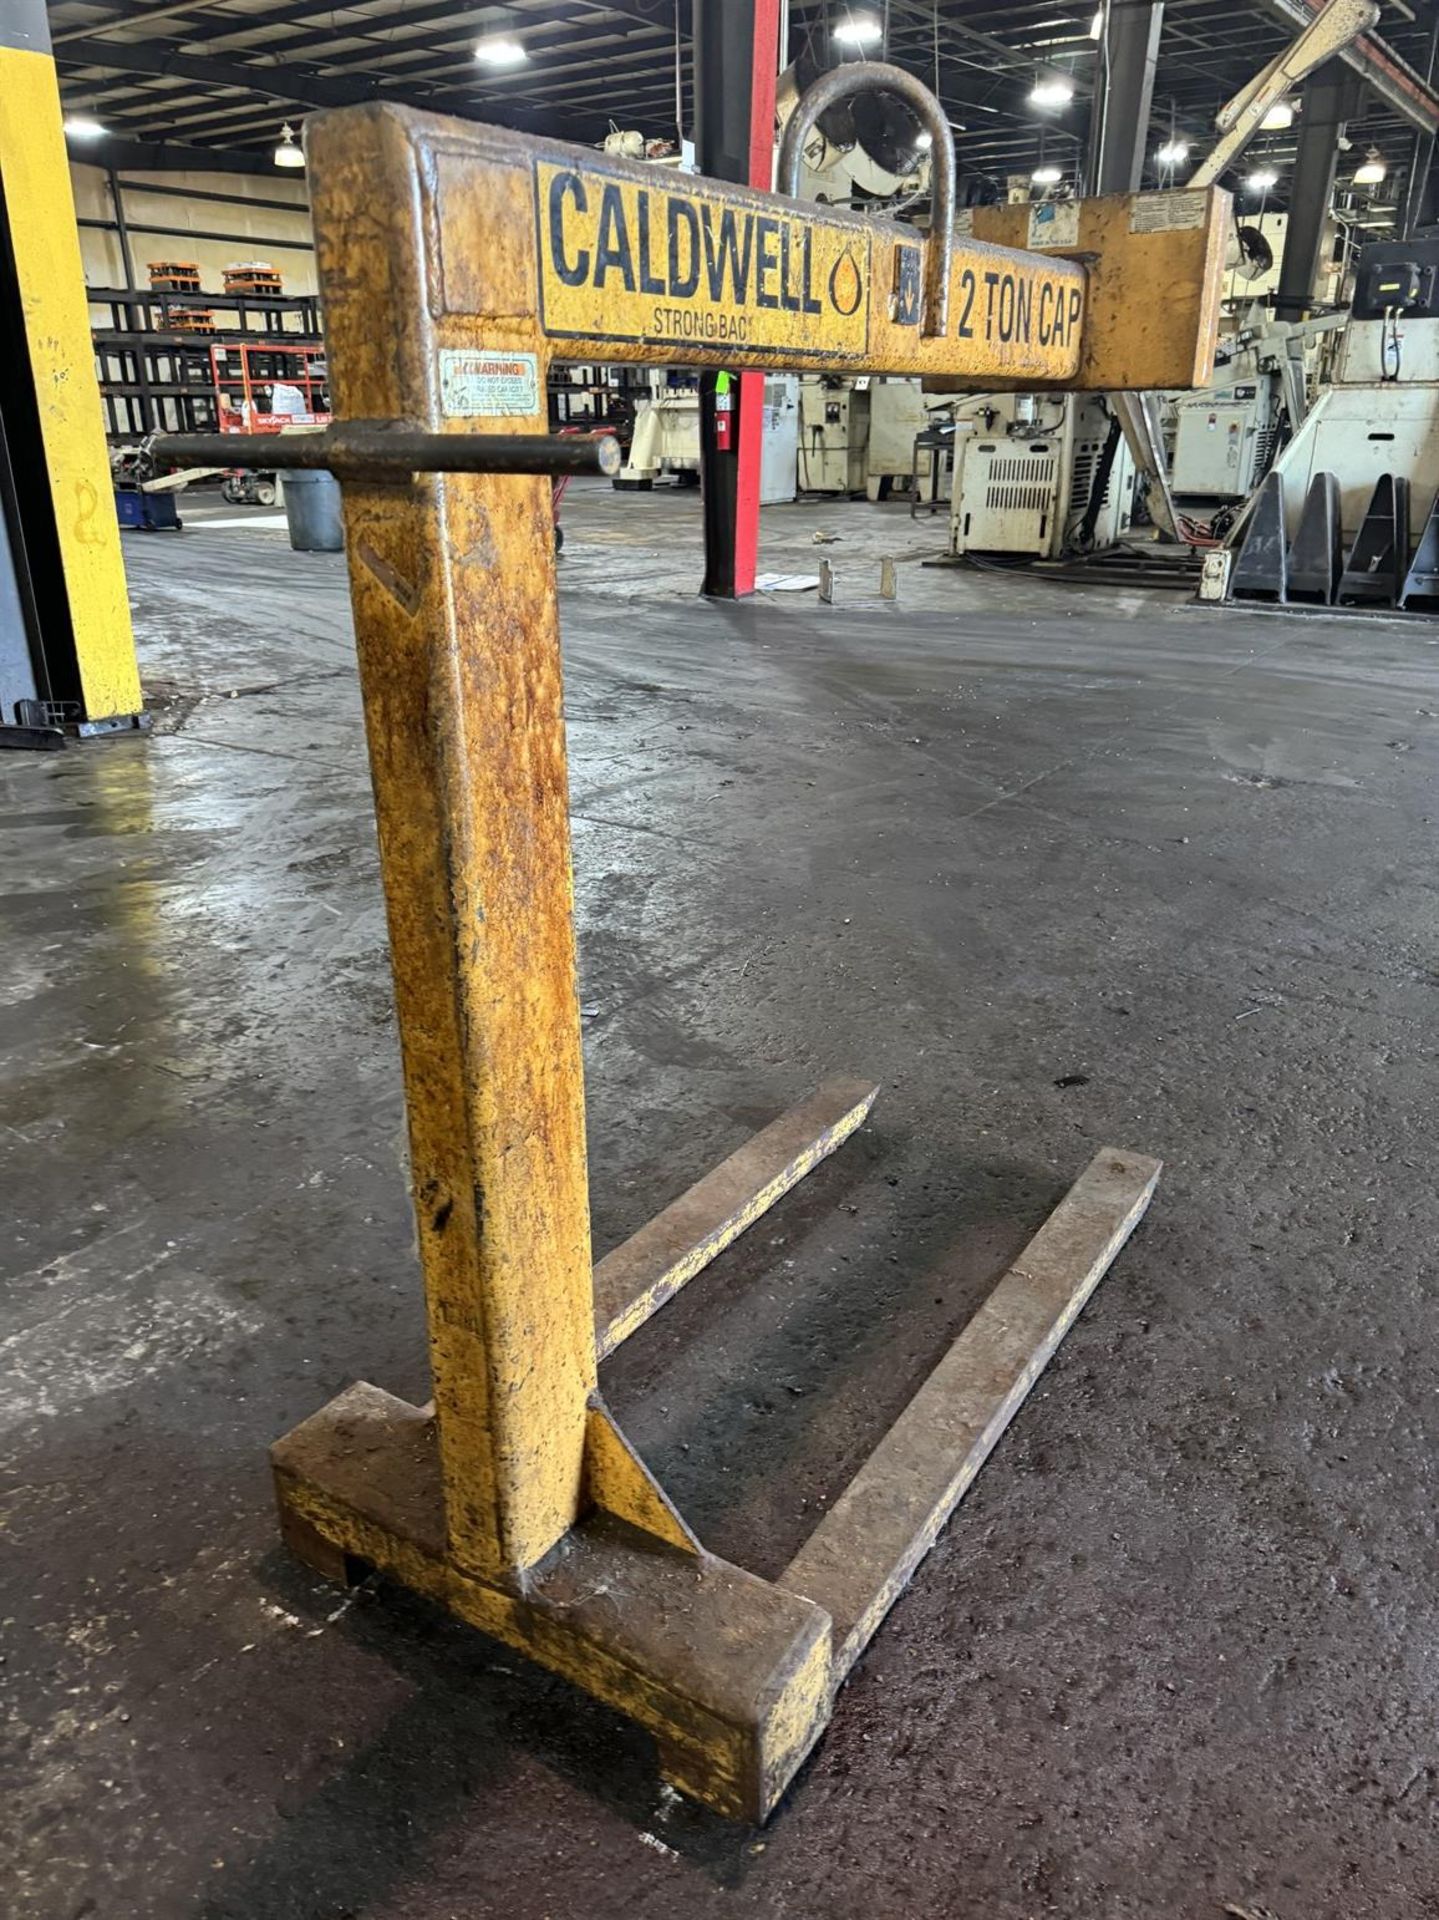 CALDWELL 90-2-48 Fixed Forks Pallet Lifter, s/n 03-44469-2, 2-Ton Capacity - Image 4 of 5